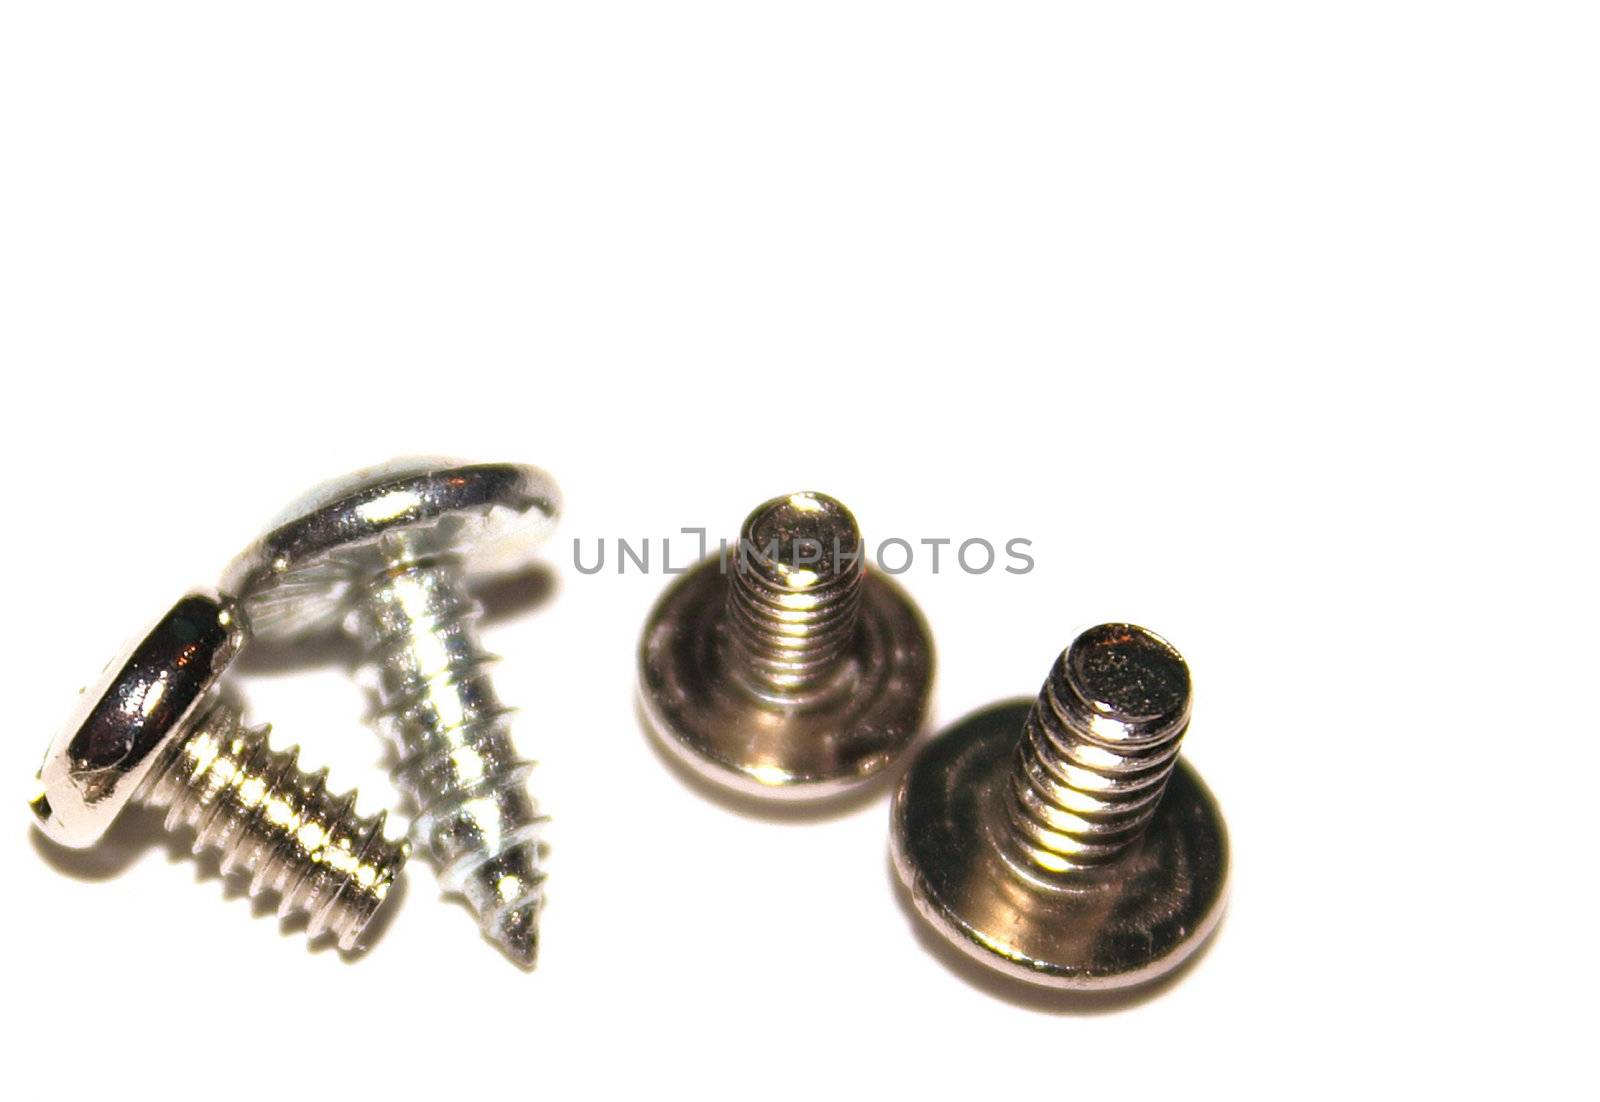 assorted small screws over a white background